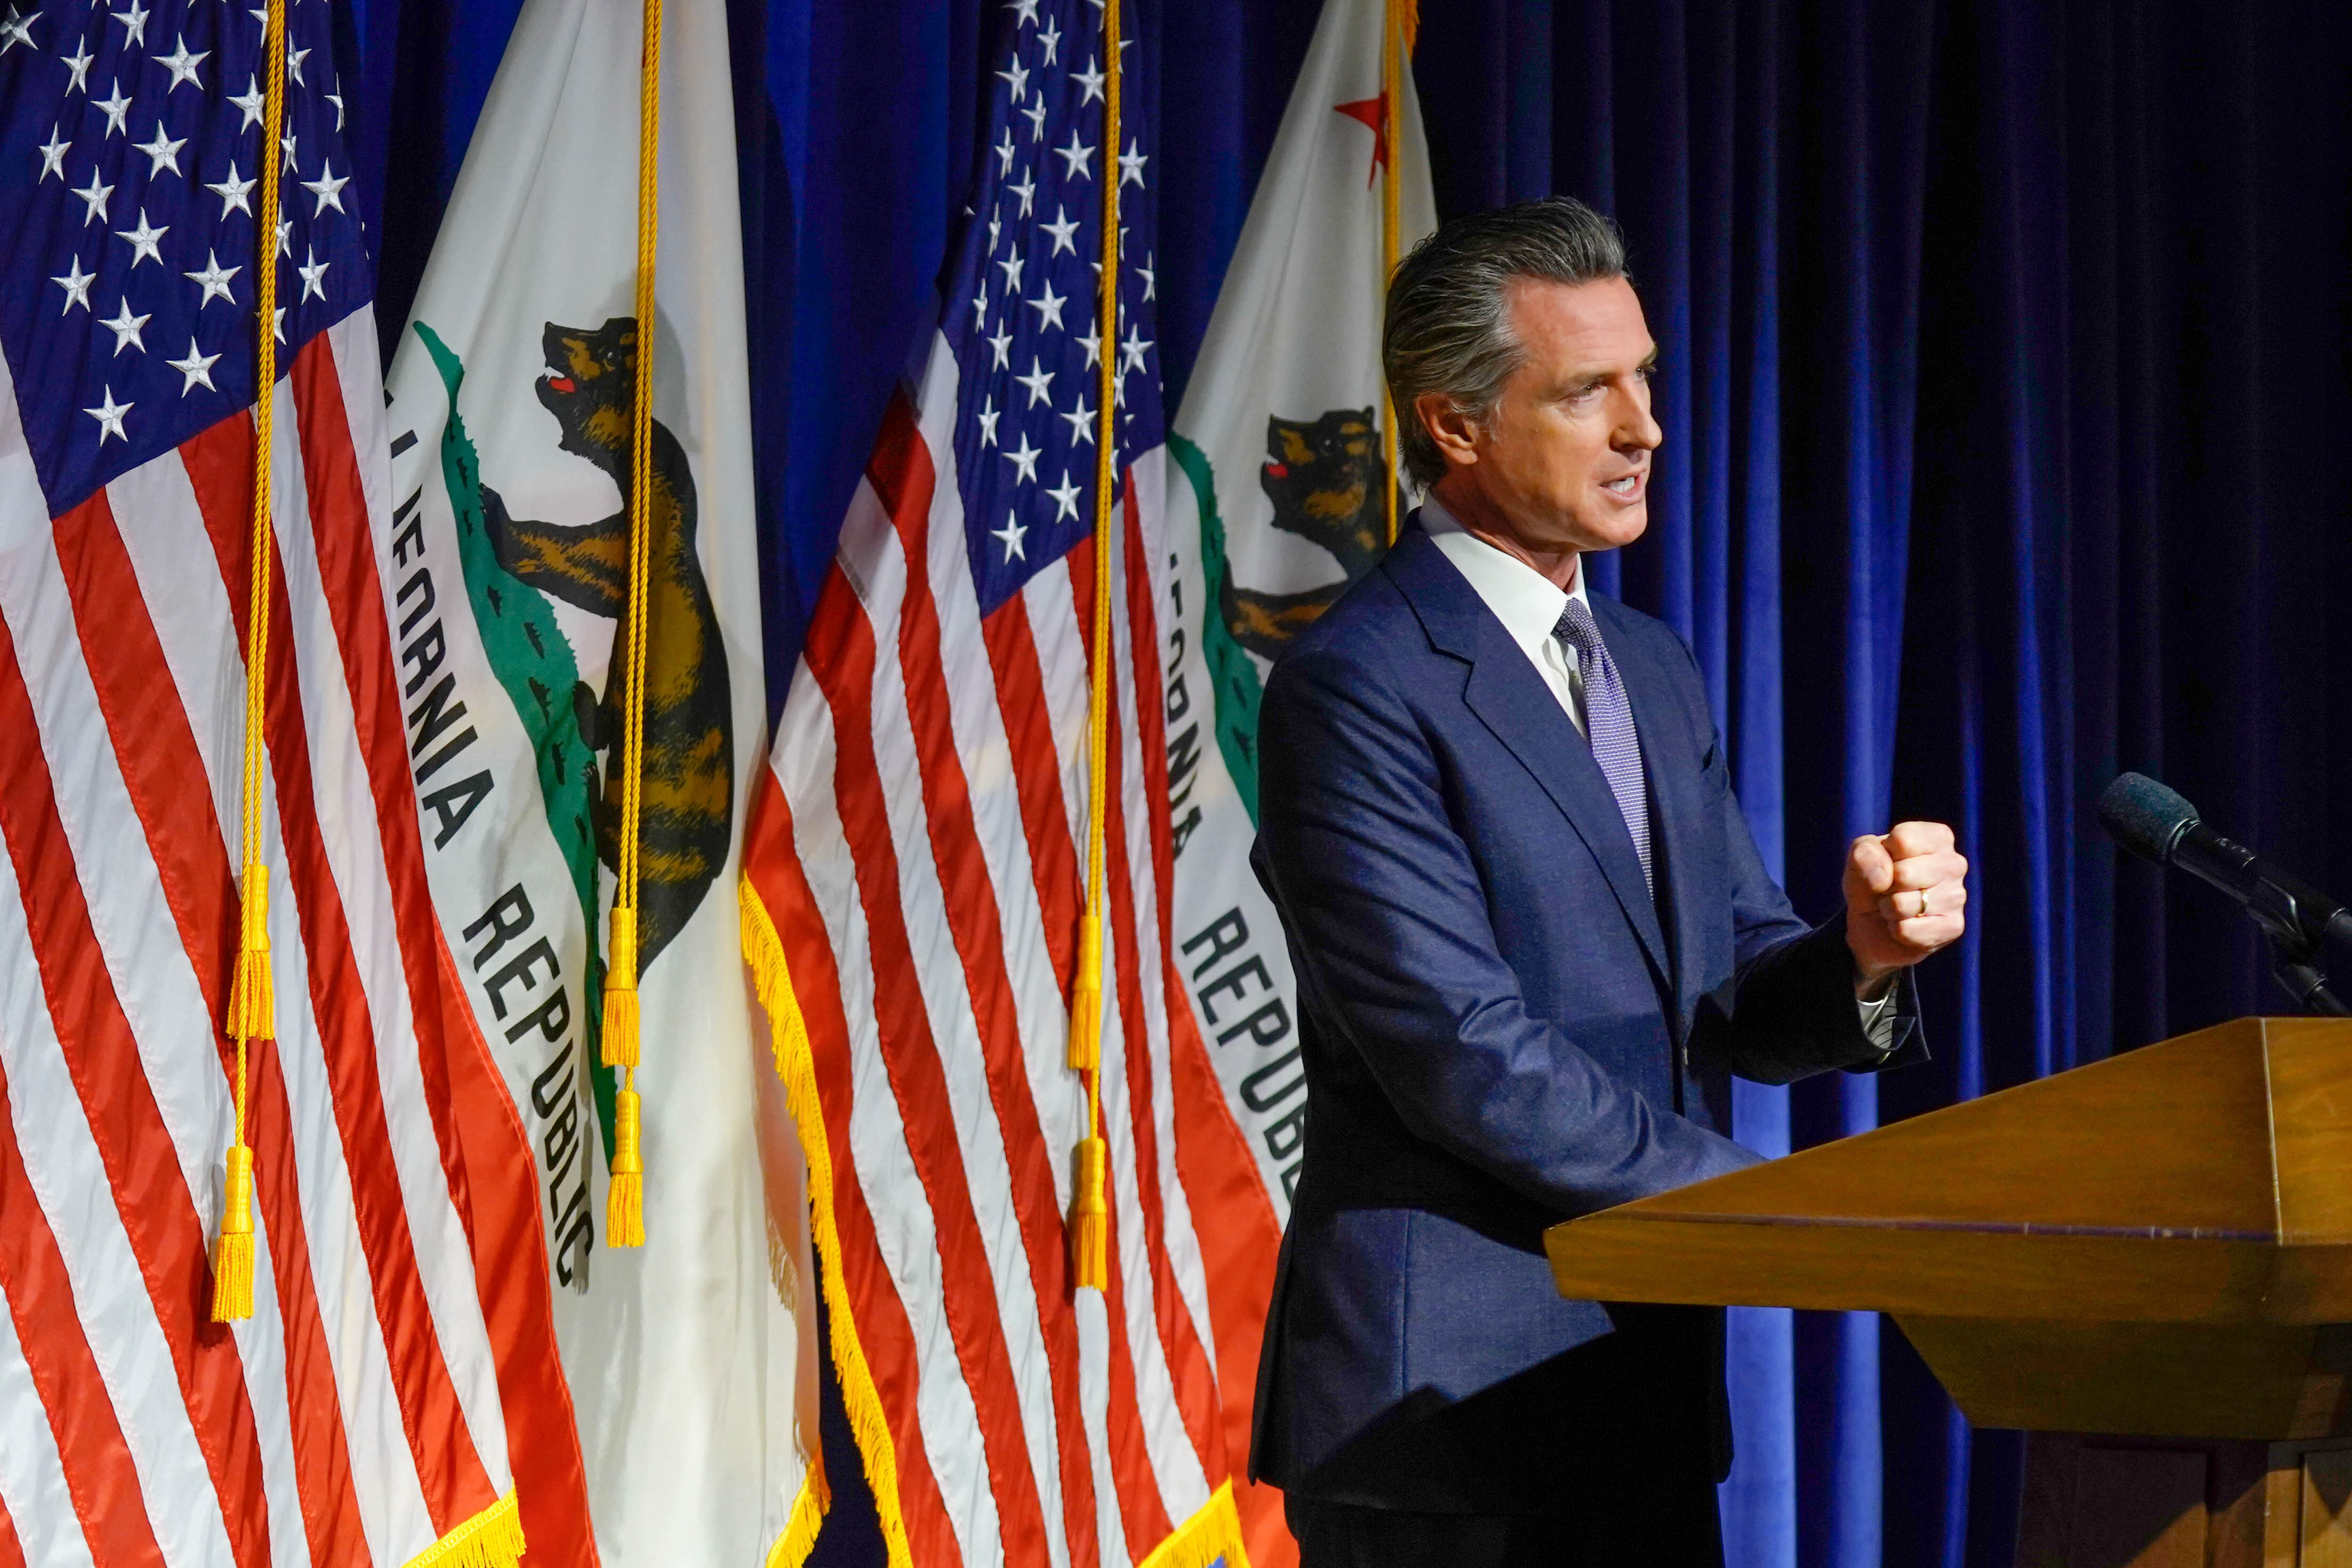 Opinion: California's budget deficit will force difficult cuts. This one should be the easiest